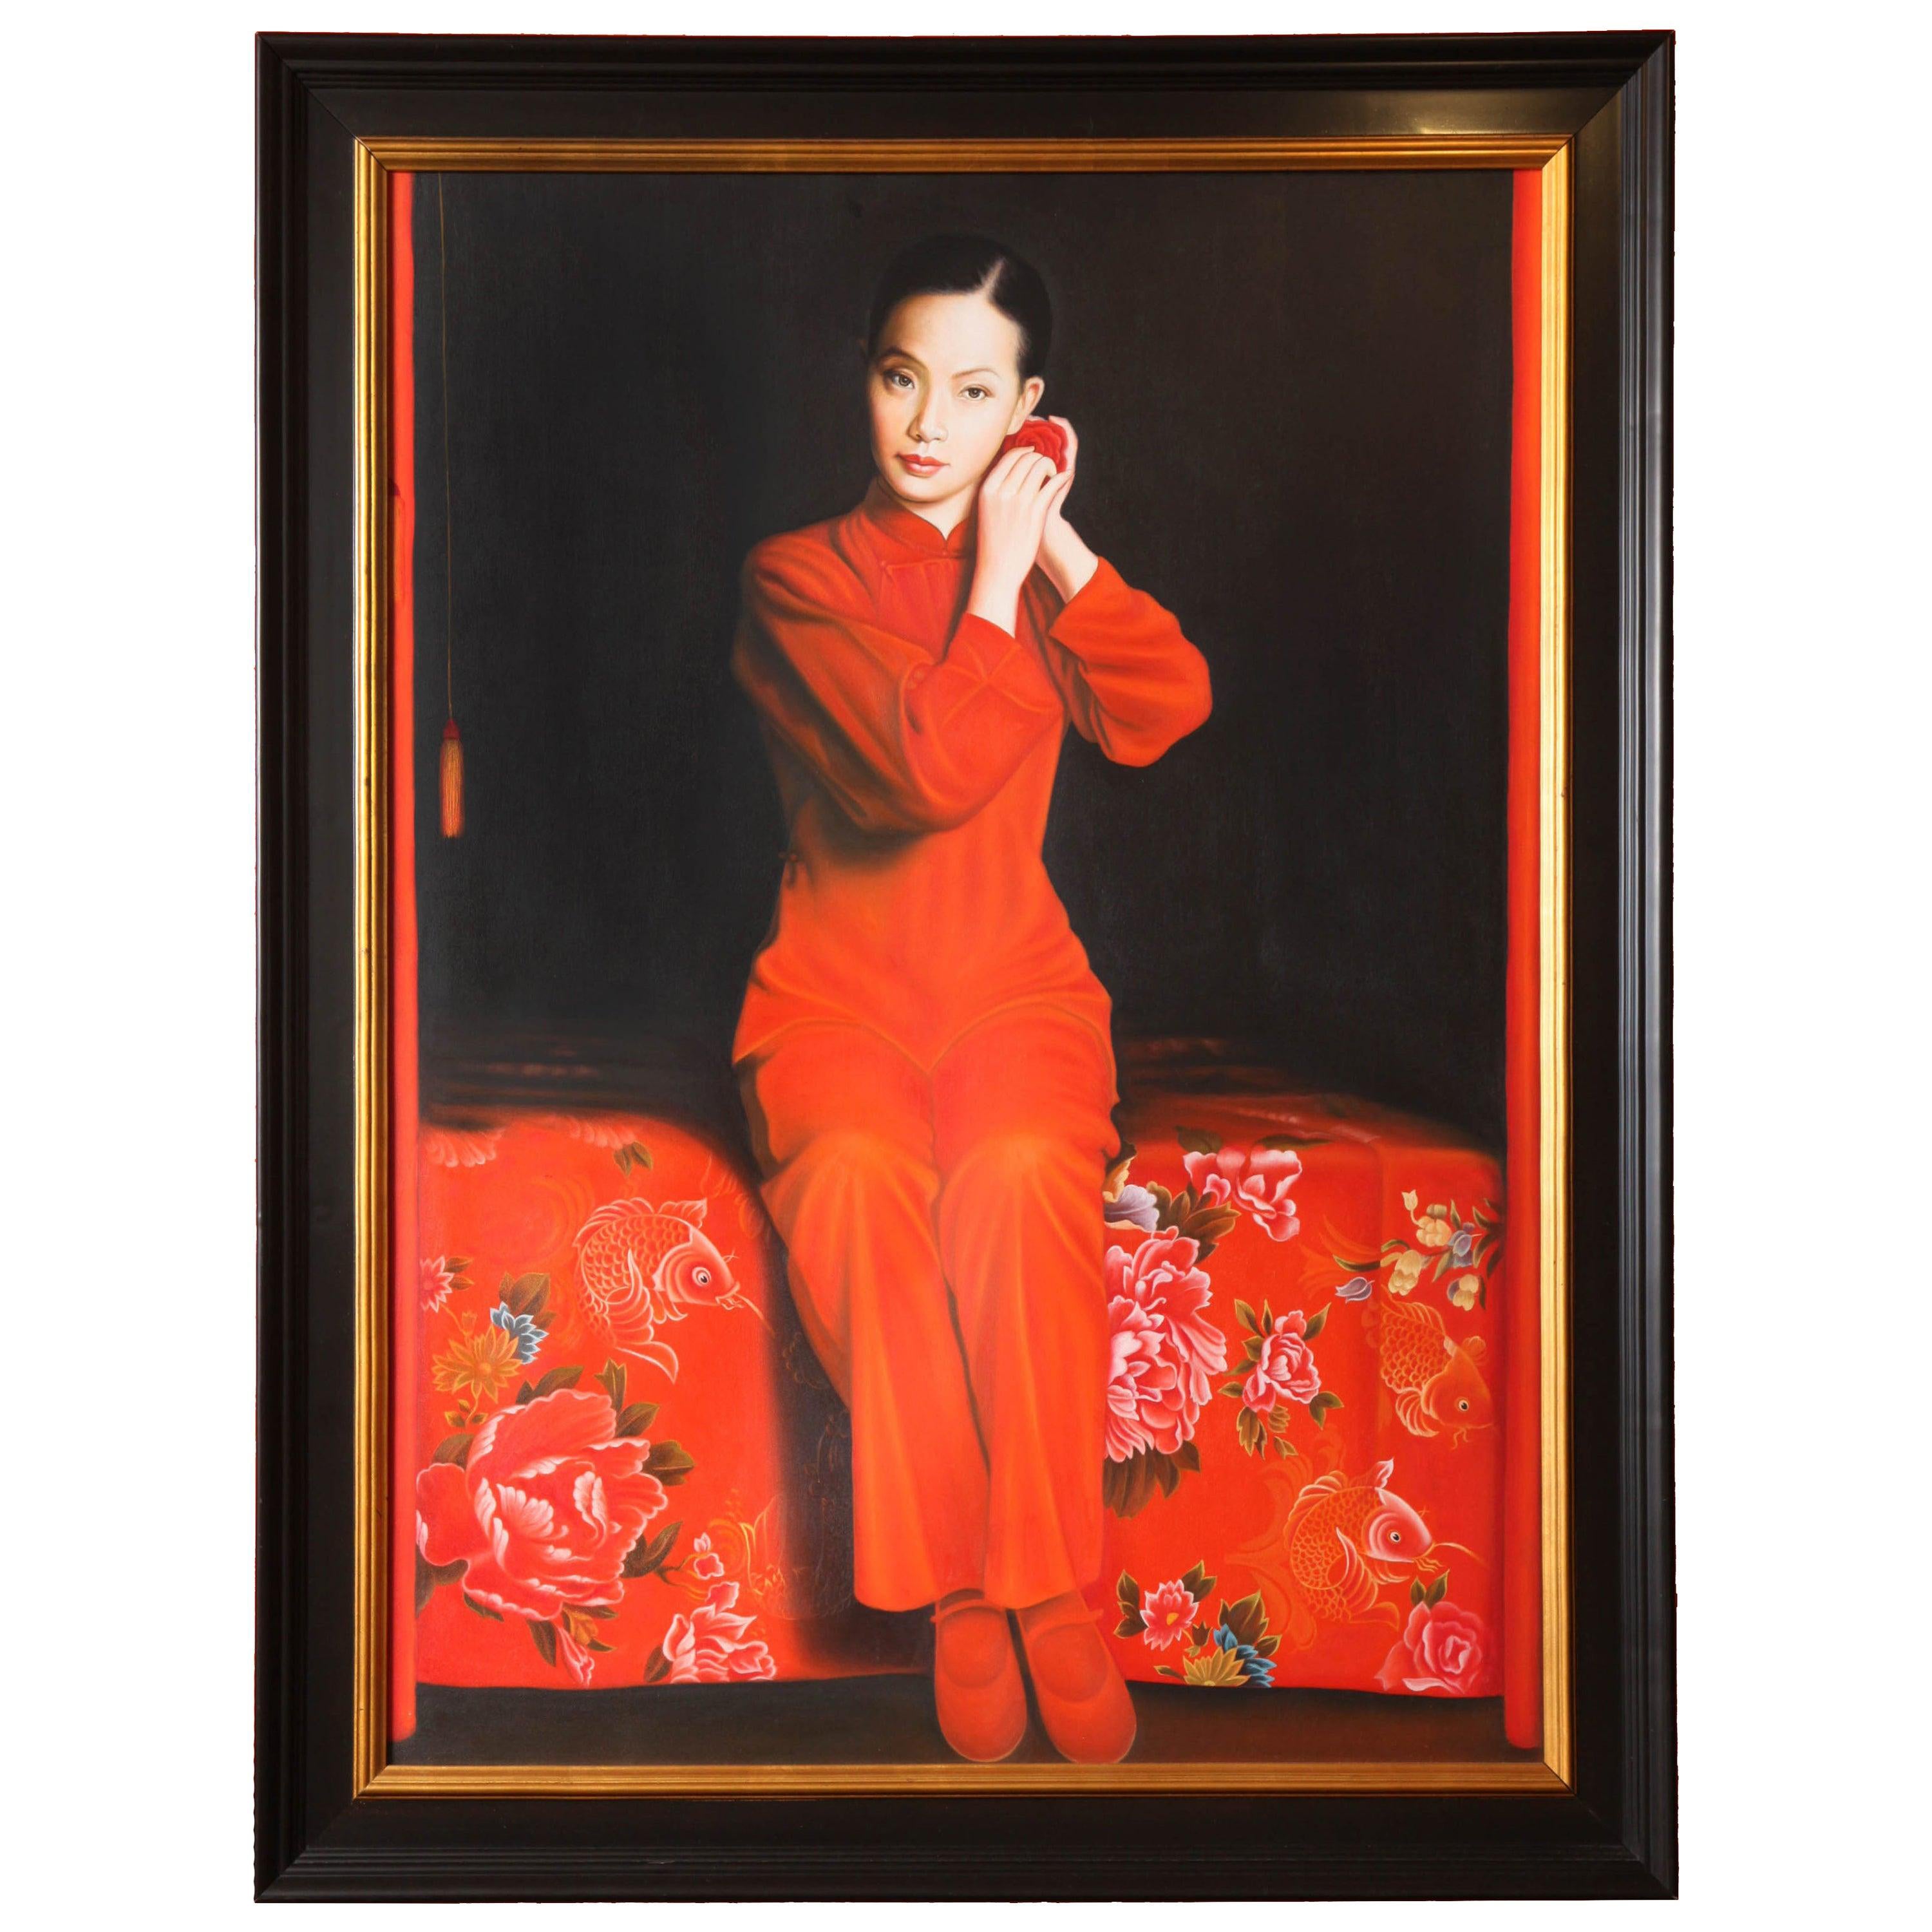 Painting by Hanoi Artist, circa 2007, "The Muse", Red and Black, Large, Framed